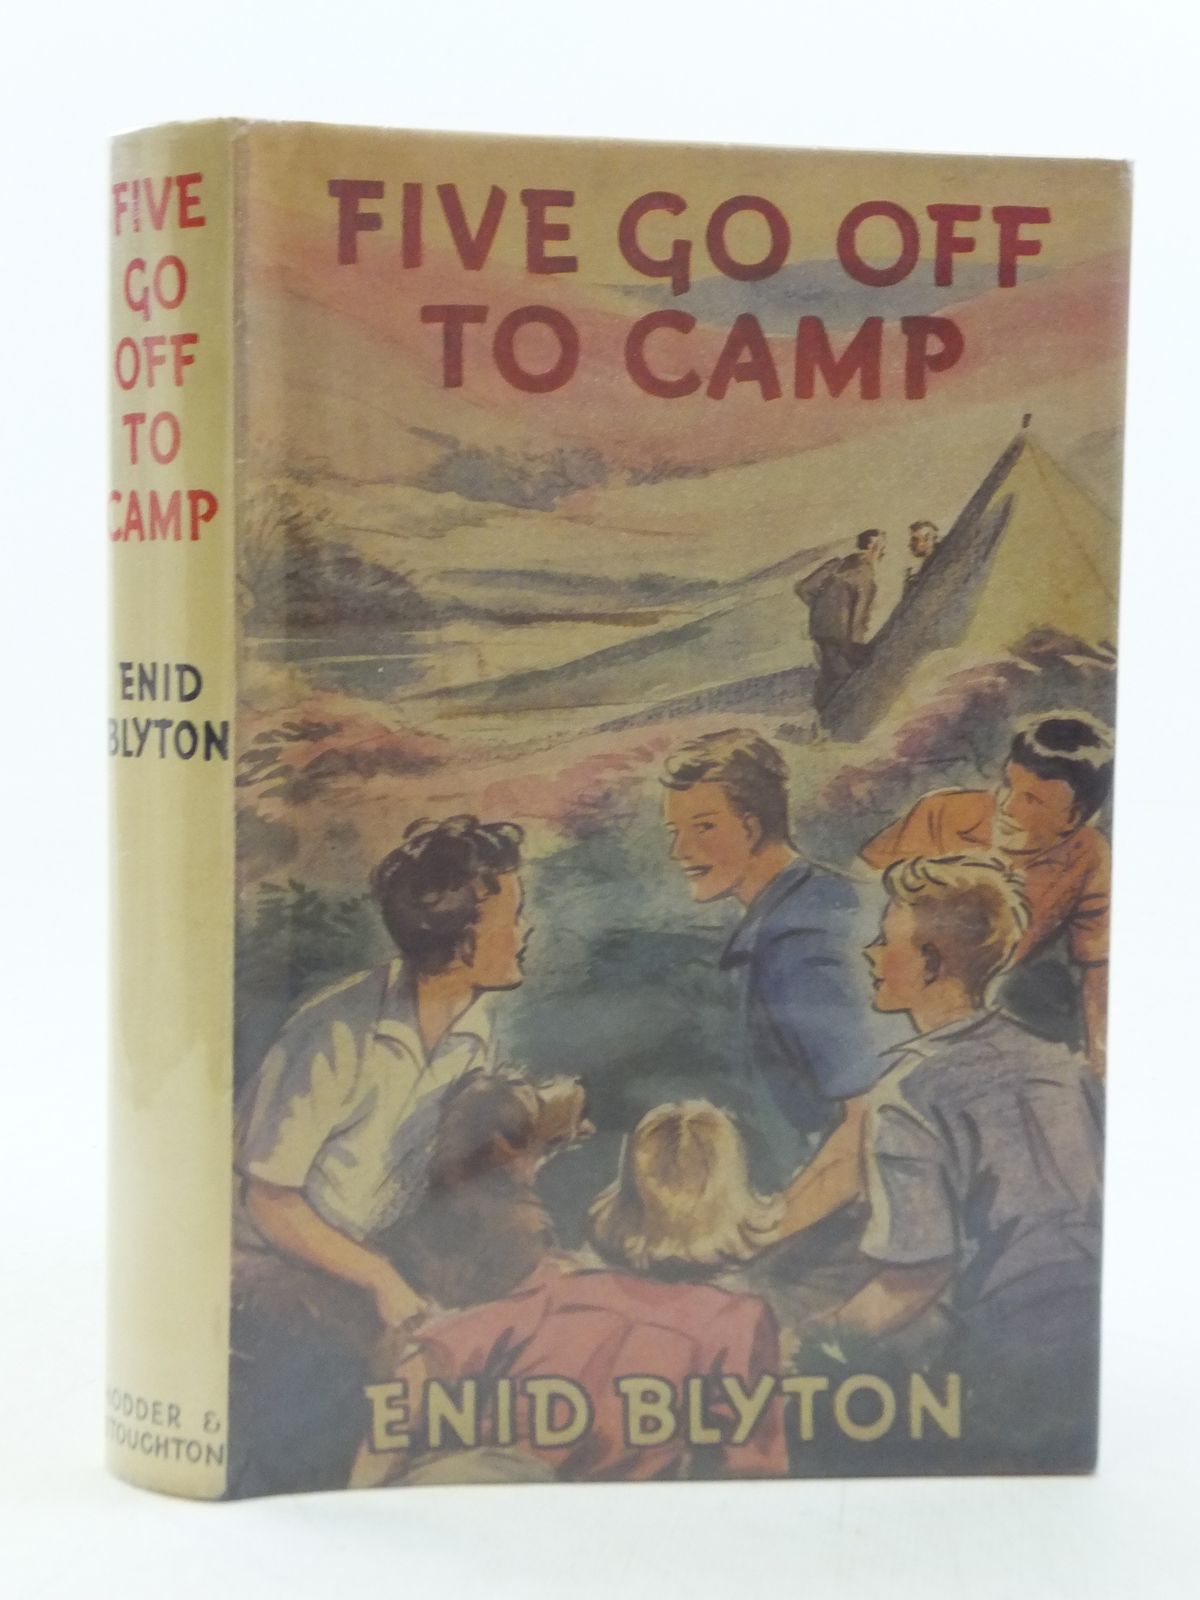 Cover of FIVE GO OFF TO CAMP by Enid Blyton